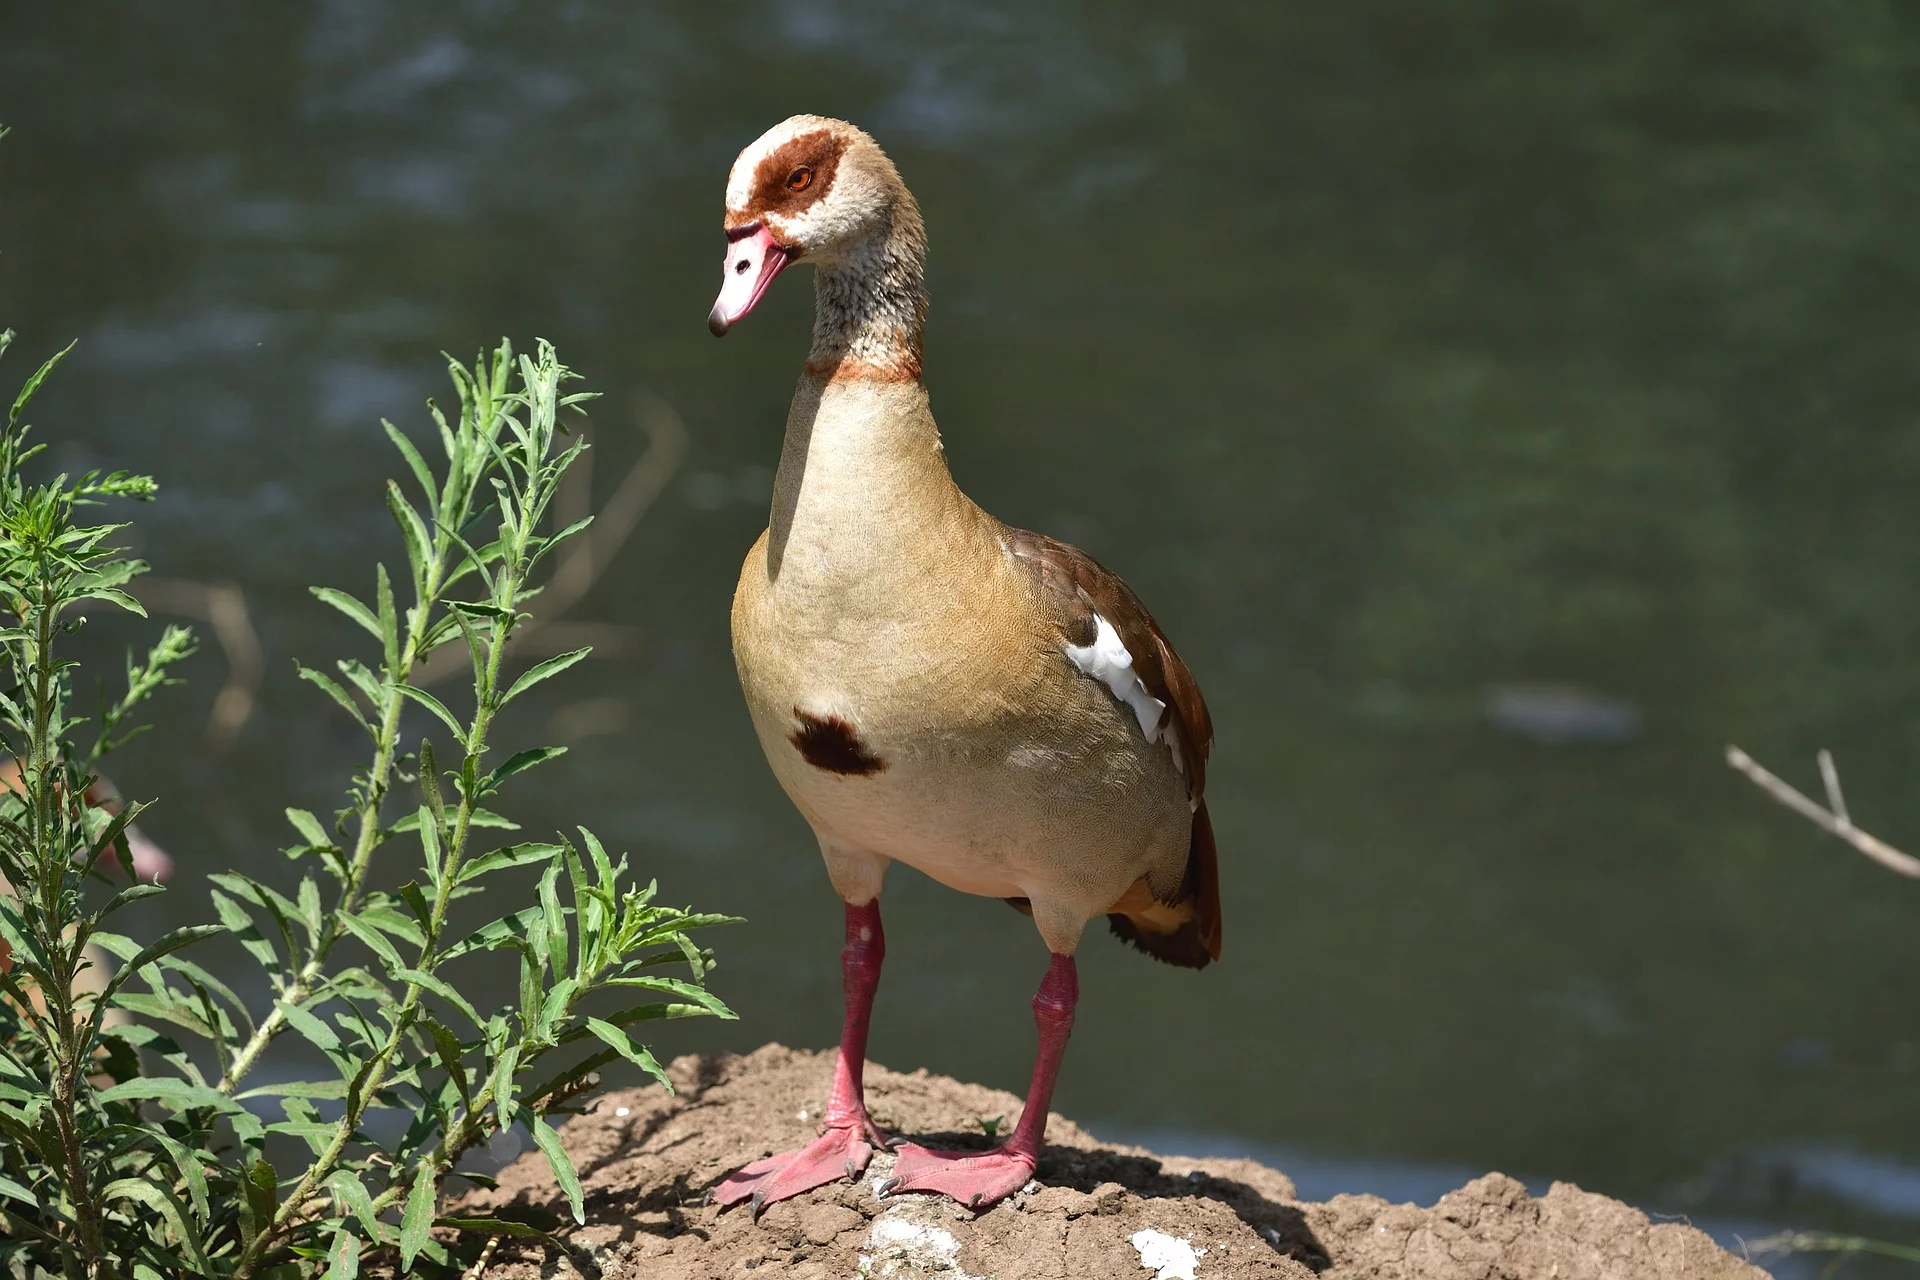 Safari of Africa - a duck at a river in Africa